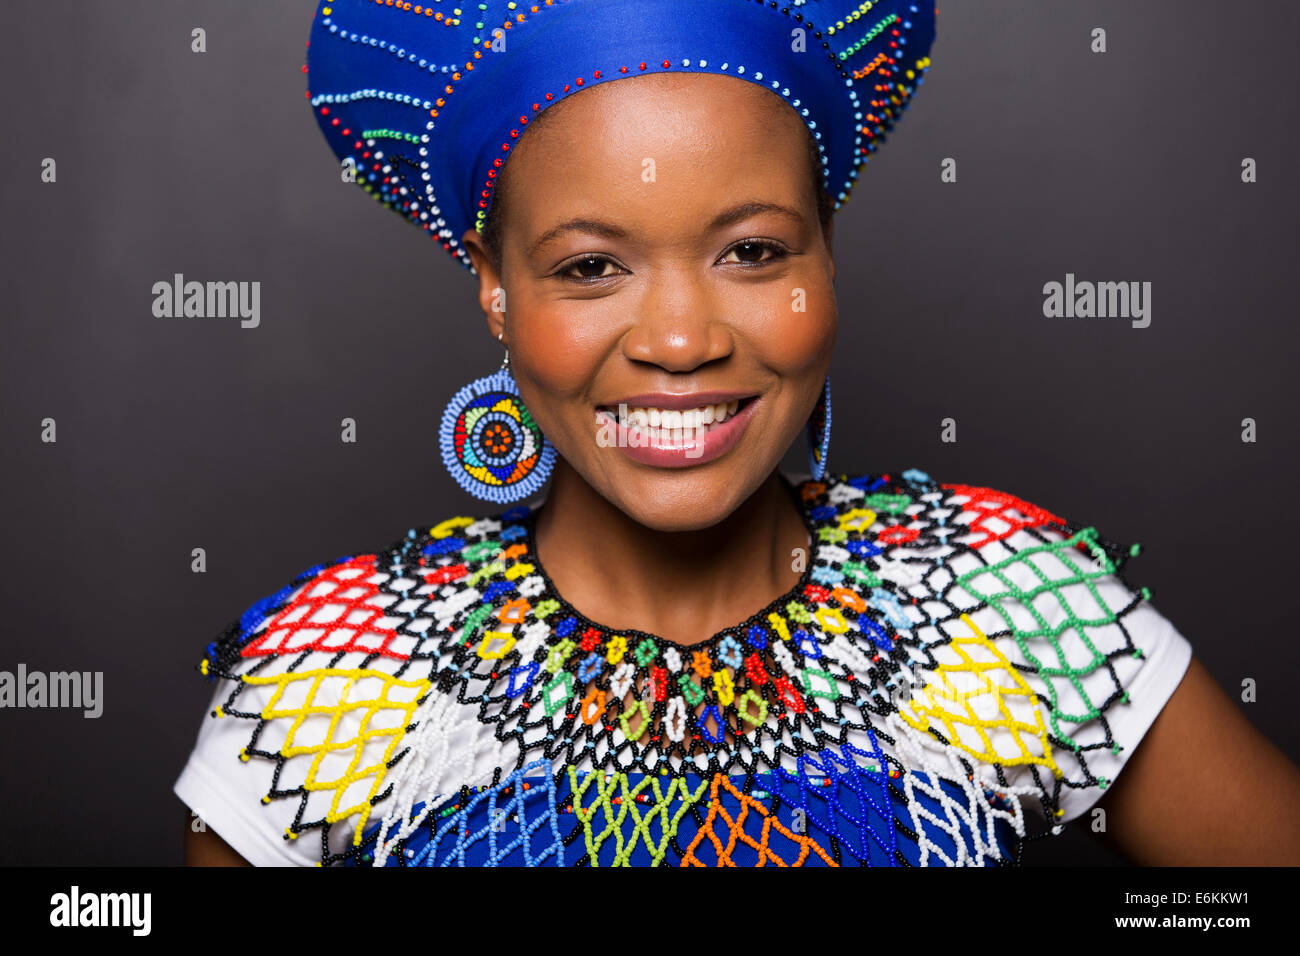 close up portrait of African zulu girl wearing traditional attire Stock Photo